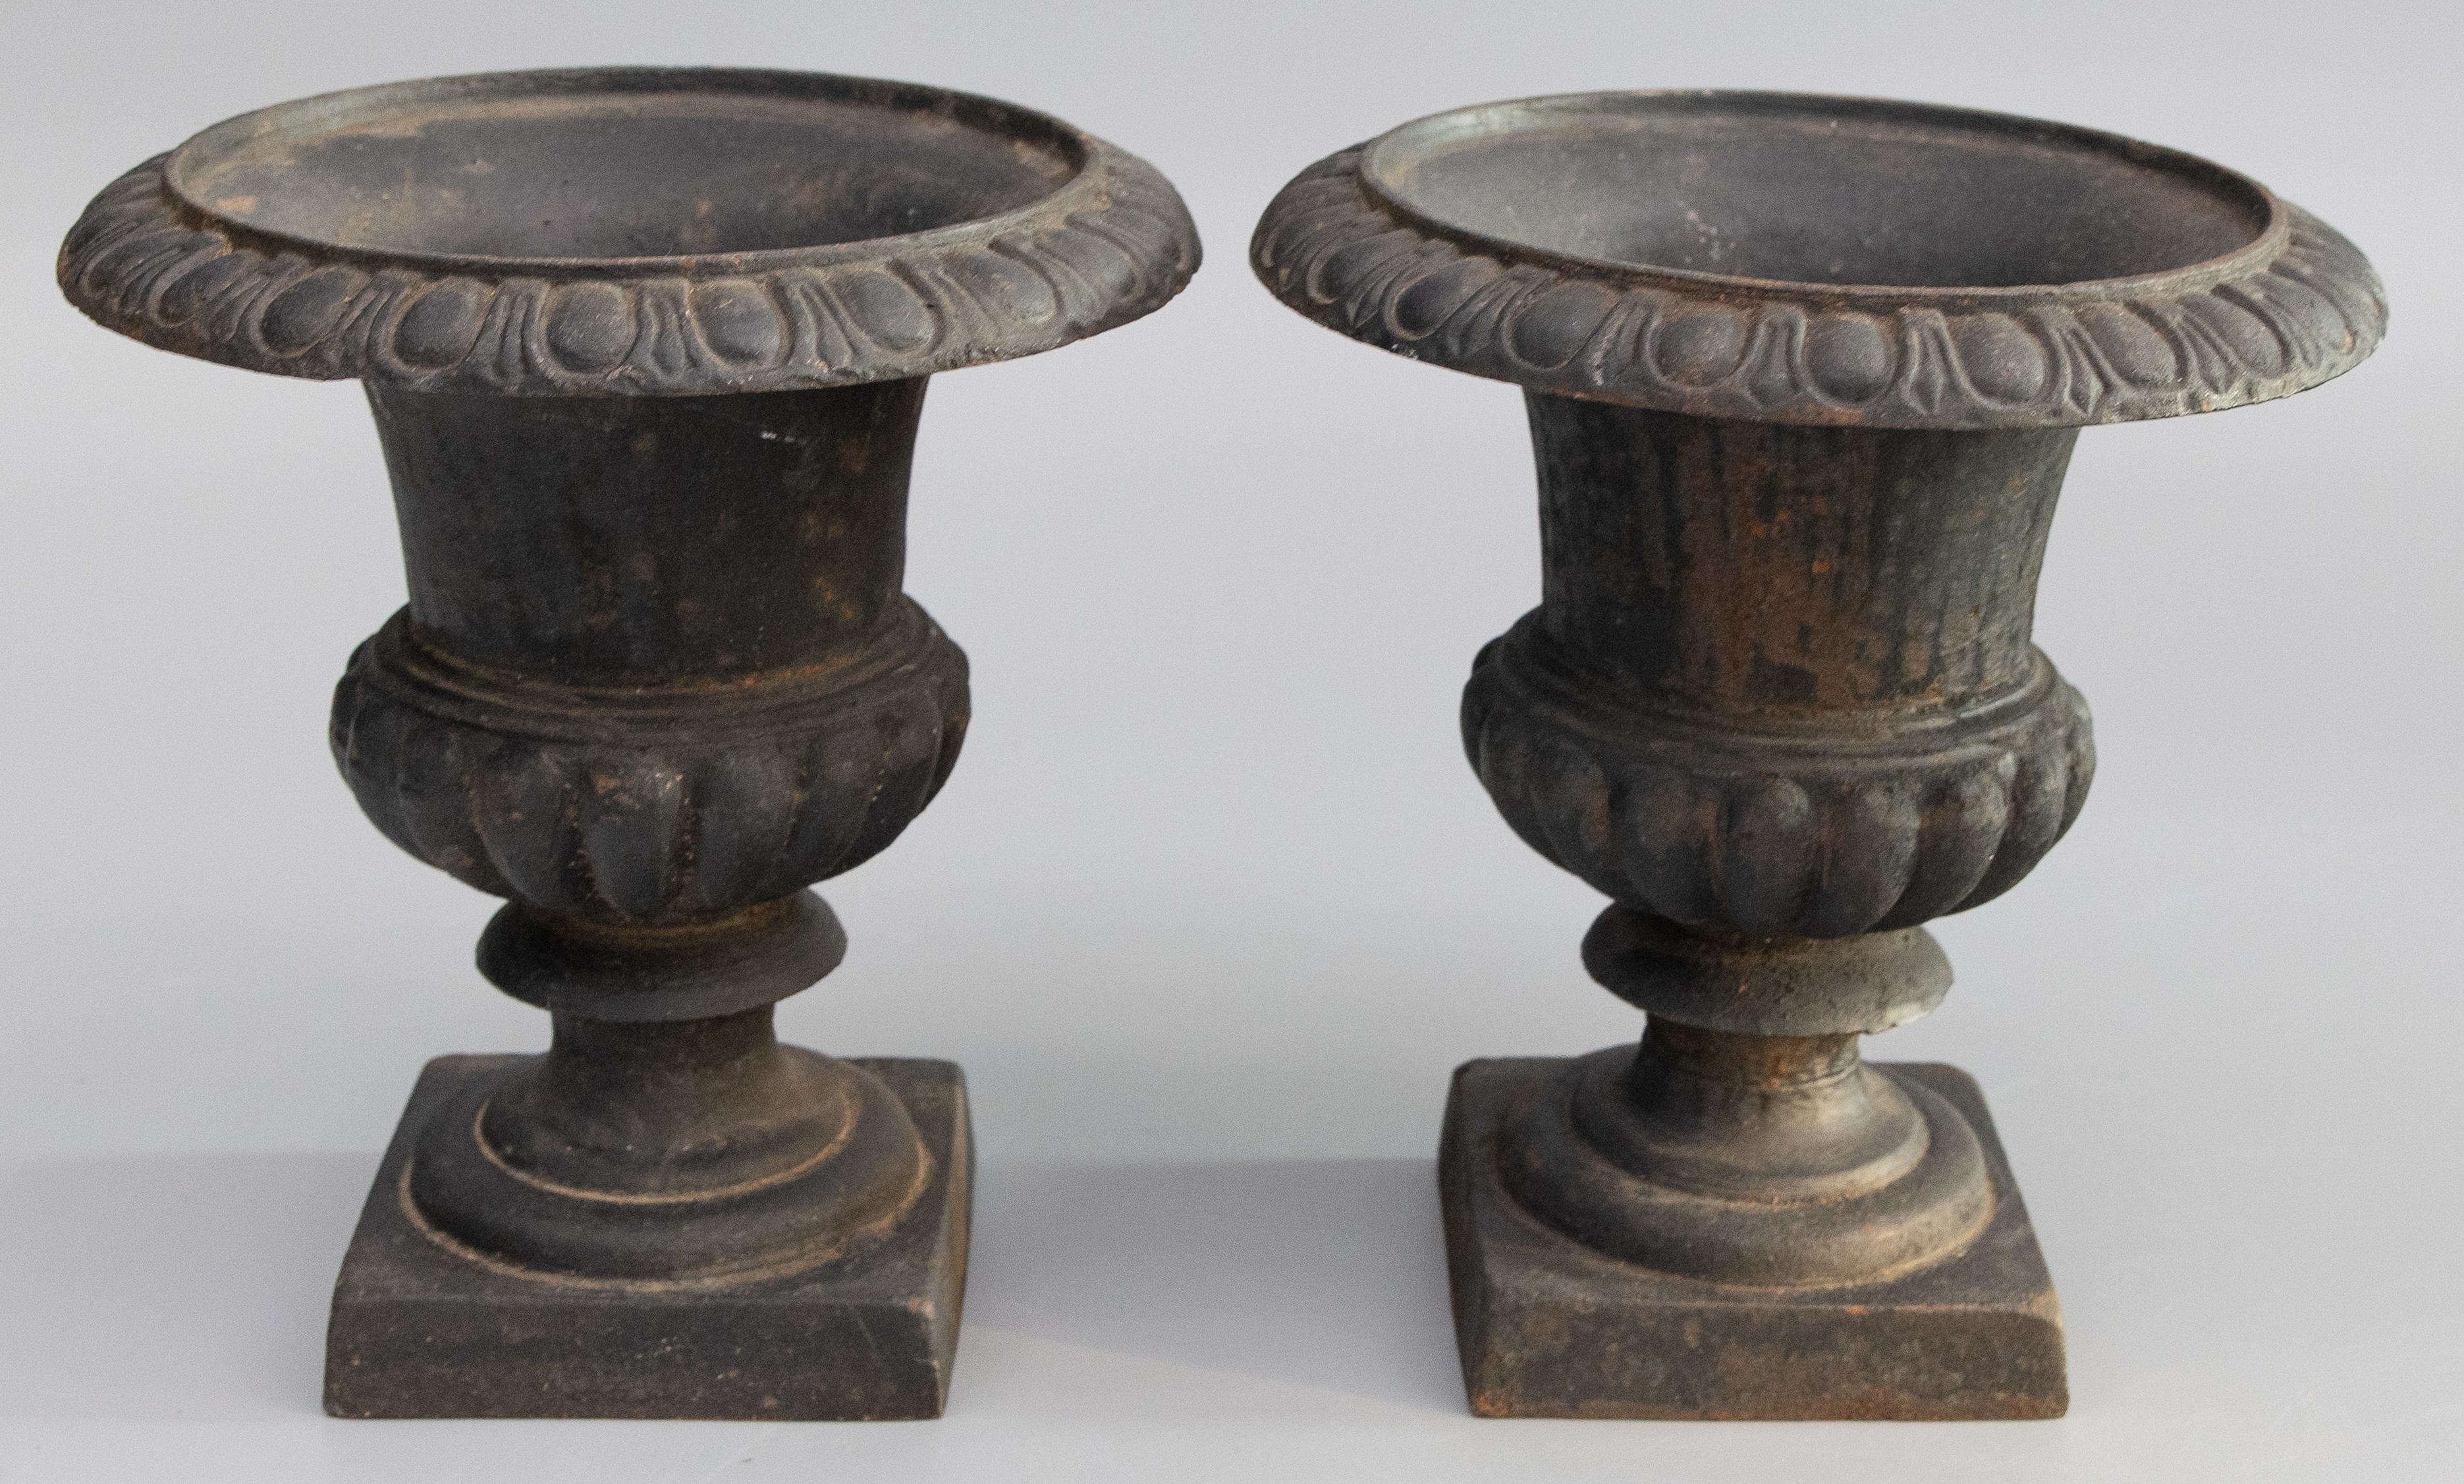 A fabulous pair of antique early 20th-Century French Neoclassical style cast iron mantel urns or planters. These urns are solid and heavy and retain their amazing original patina. They would be lovely displayed indoors or outdoors.

DIMENSIONS
9ʺW ×